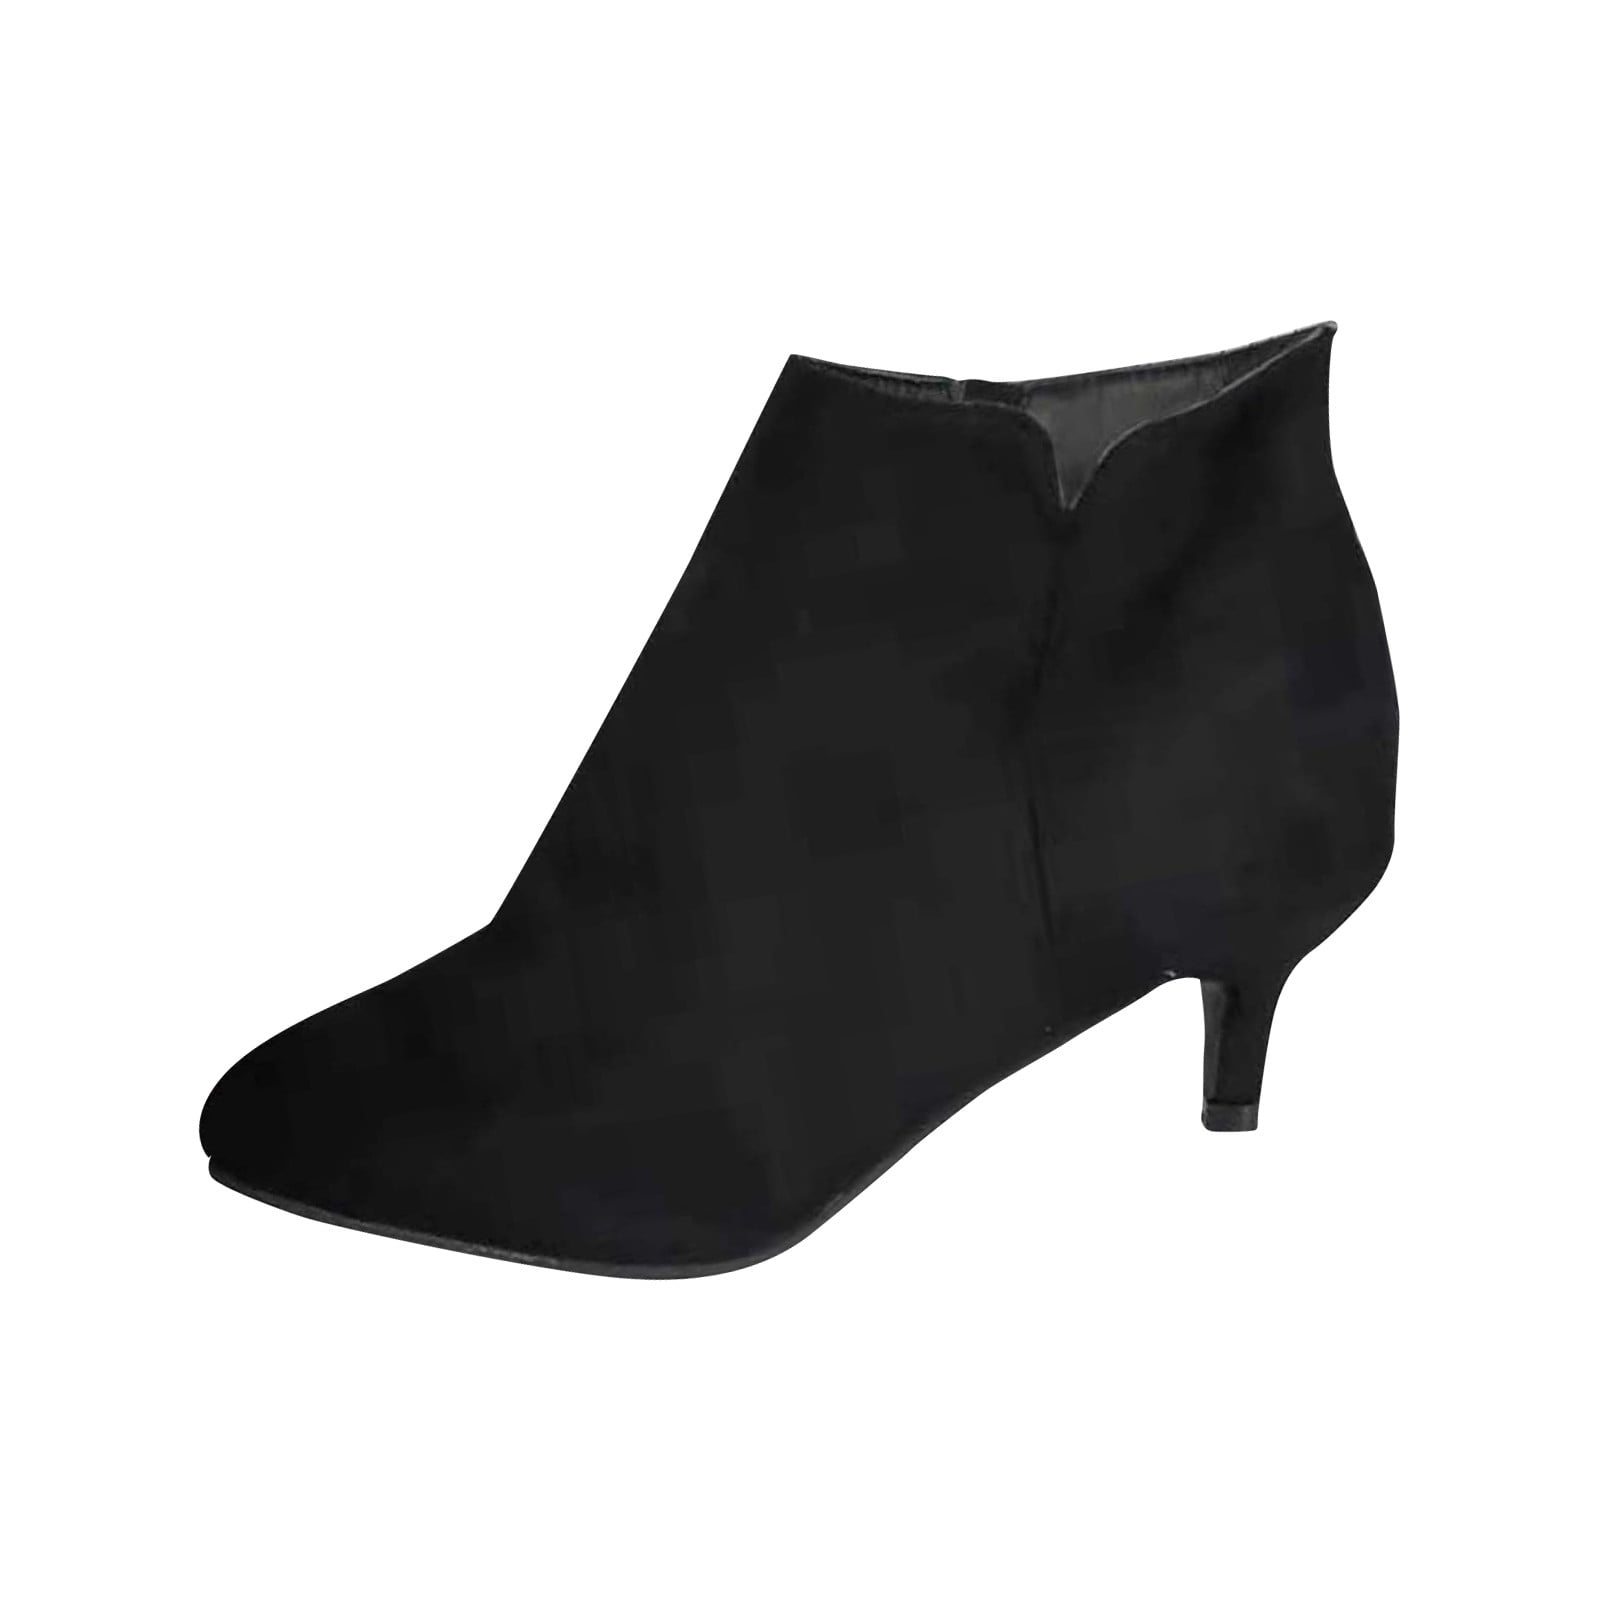 Marques Almeida Womens Flame Pointy Kitten Heel Ankle Boots Black Size 37 7